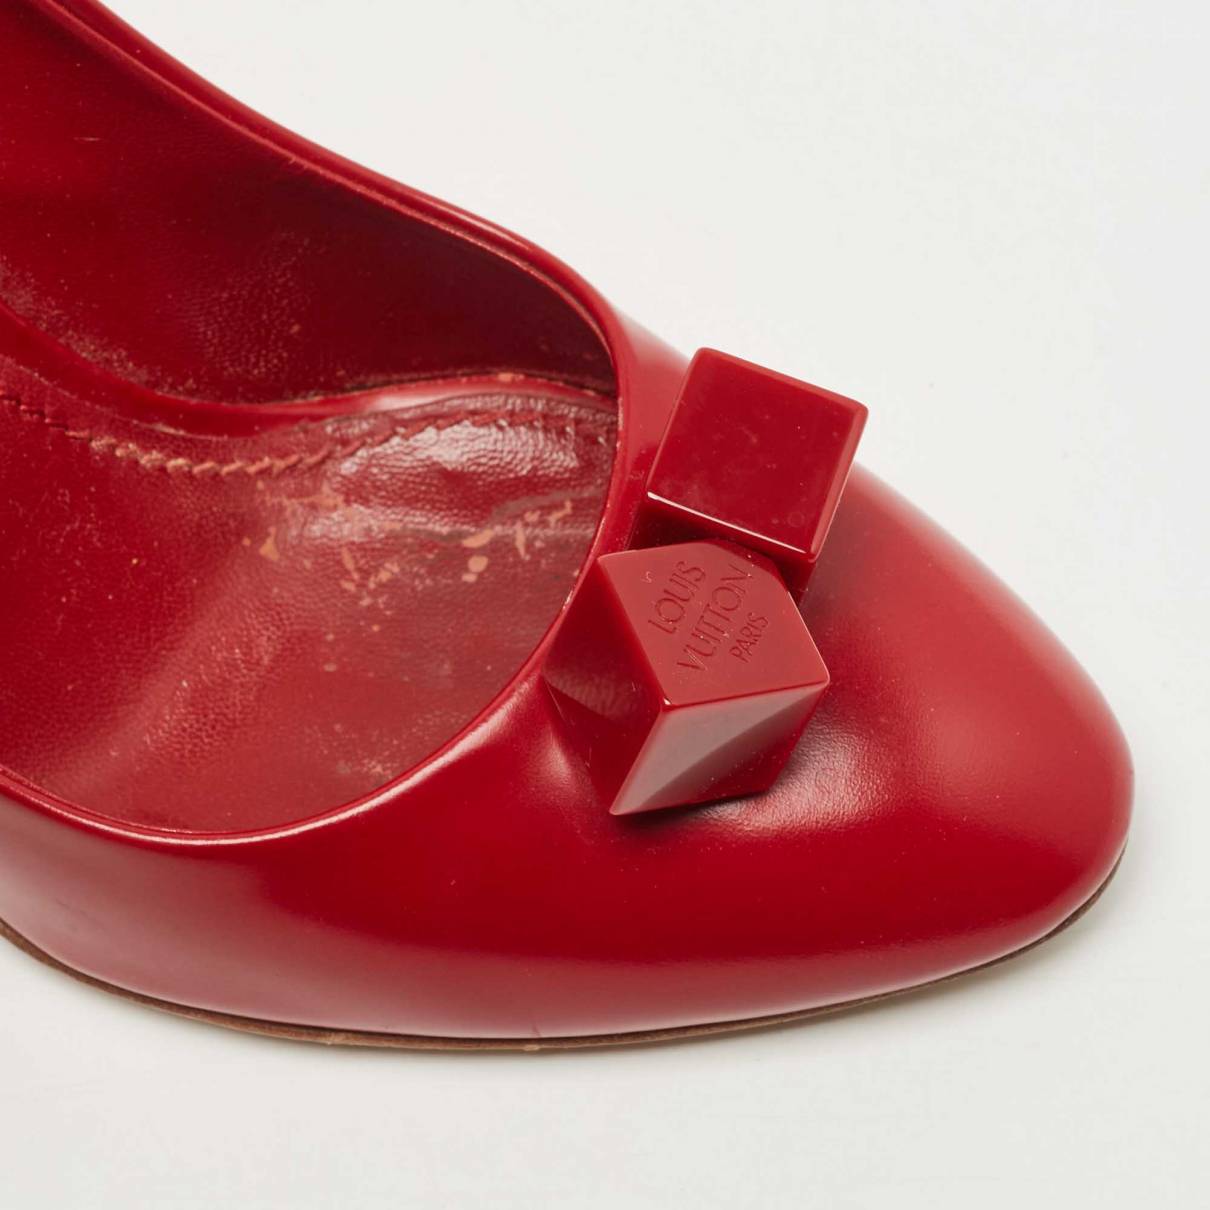 Louis Vuitton - Authenticated Heel - Leather Red Plain for Women, Good Condition